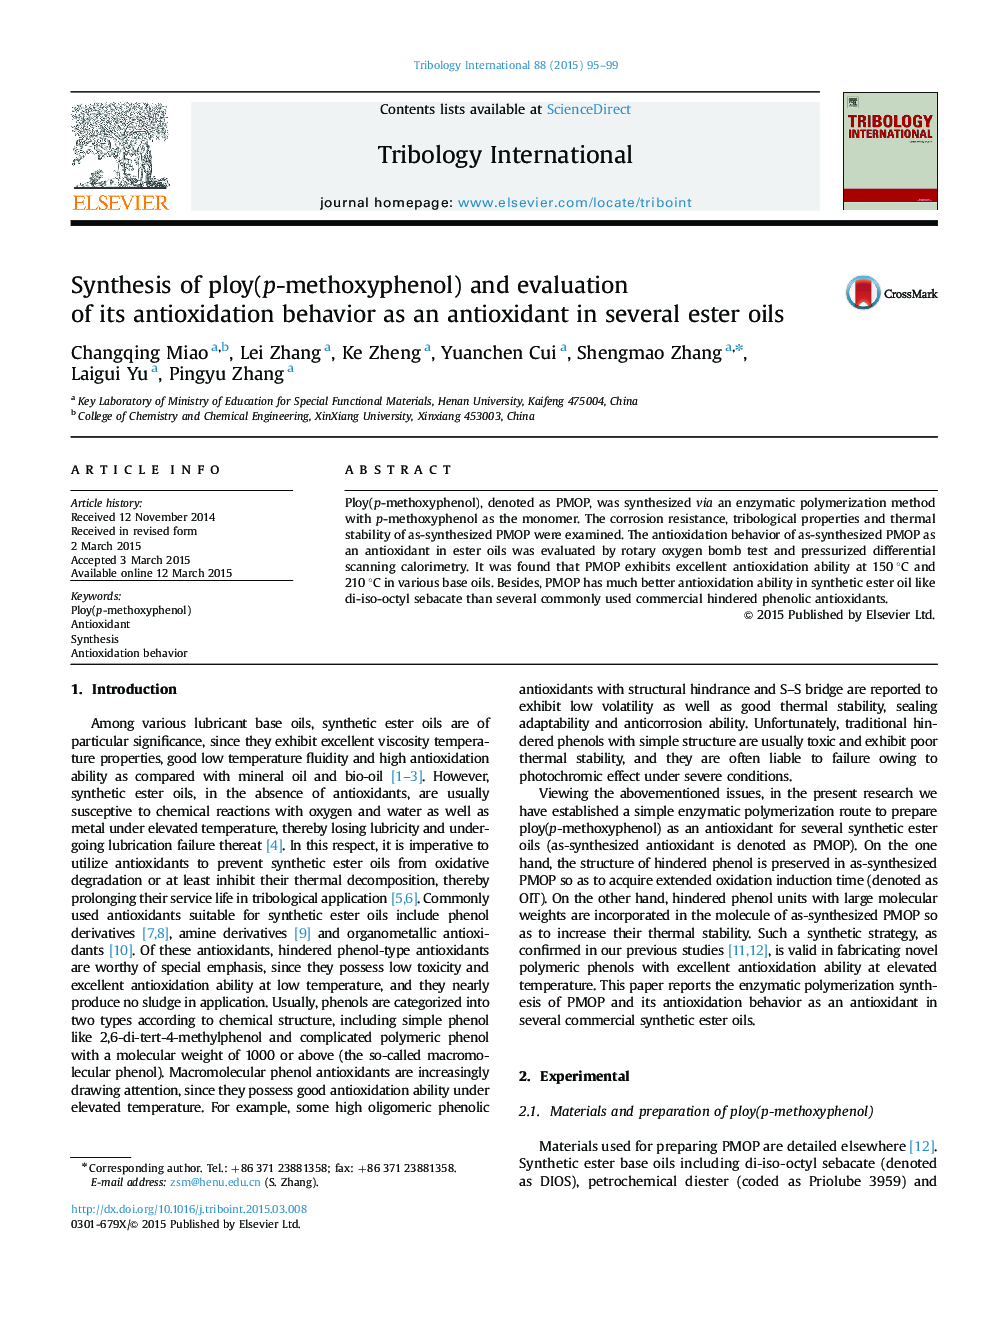 Synthesis of ploy(p-methoxyphenol) and evaluation of its antioxidation behavior as an antioxidant in several ester oils